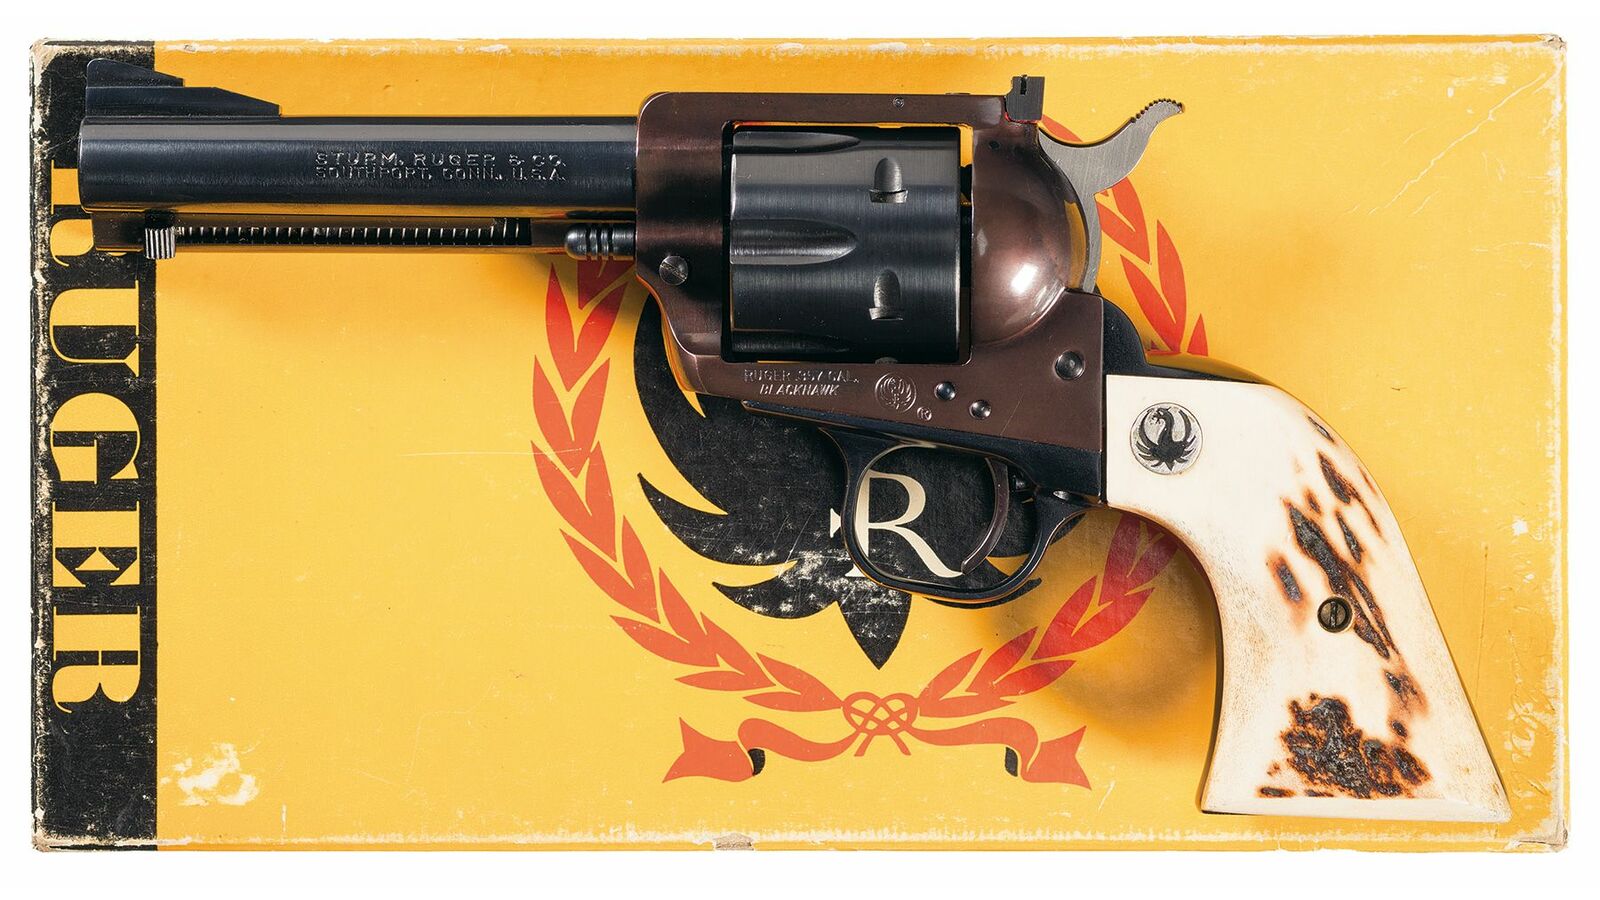 ruger gun values by serial number